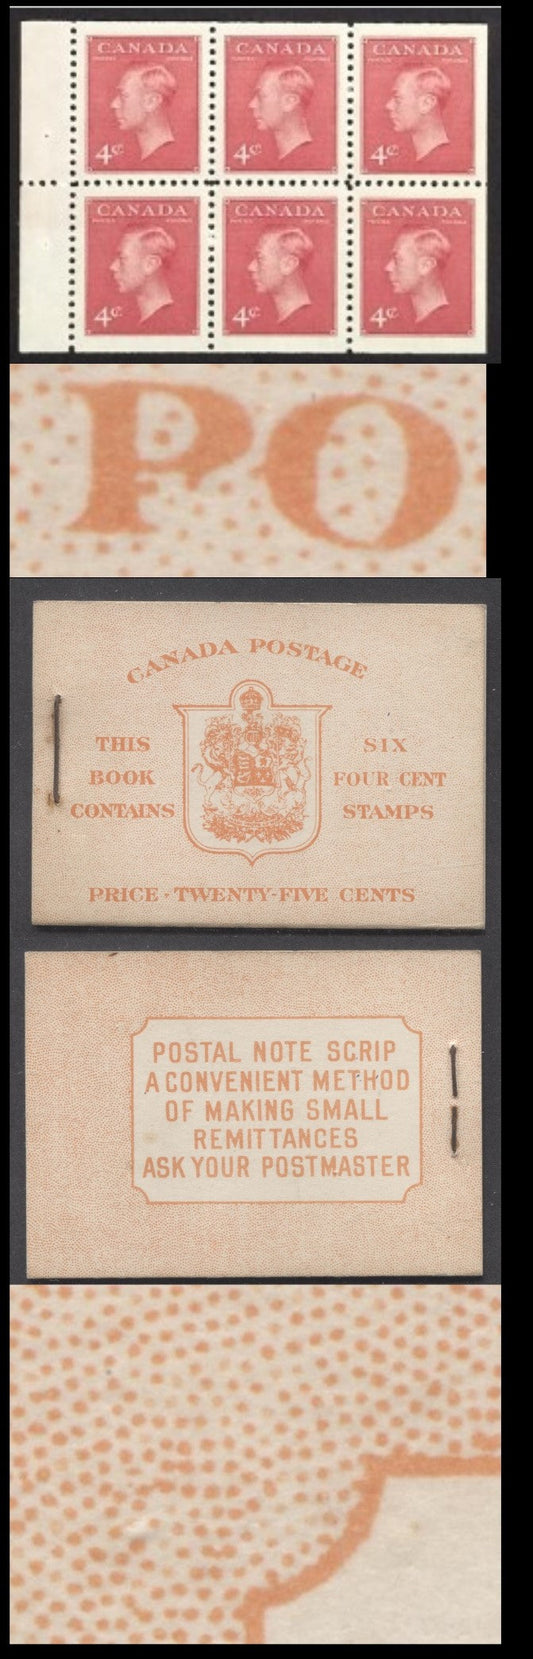 Lot 87 Canada #BK41aE 1949-1951 KGVI Issue, A Complete 25c English Booklet With 4c Dark Carmine, Pane Of 6. Front Cover IIi, Back Cover Cai, Type I Cover, 7c & 5c Rates, 'Postmaster', 450,000 Issued